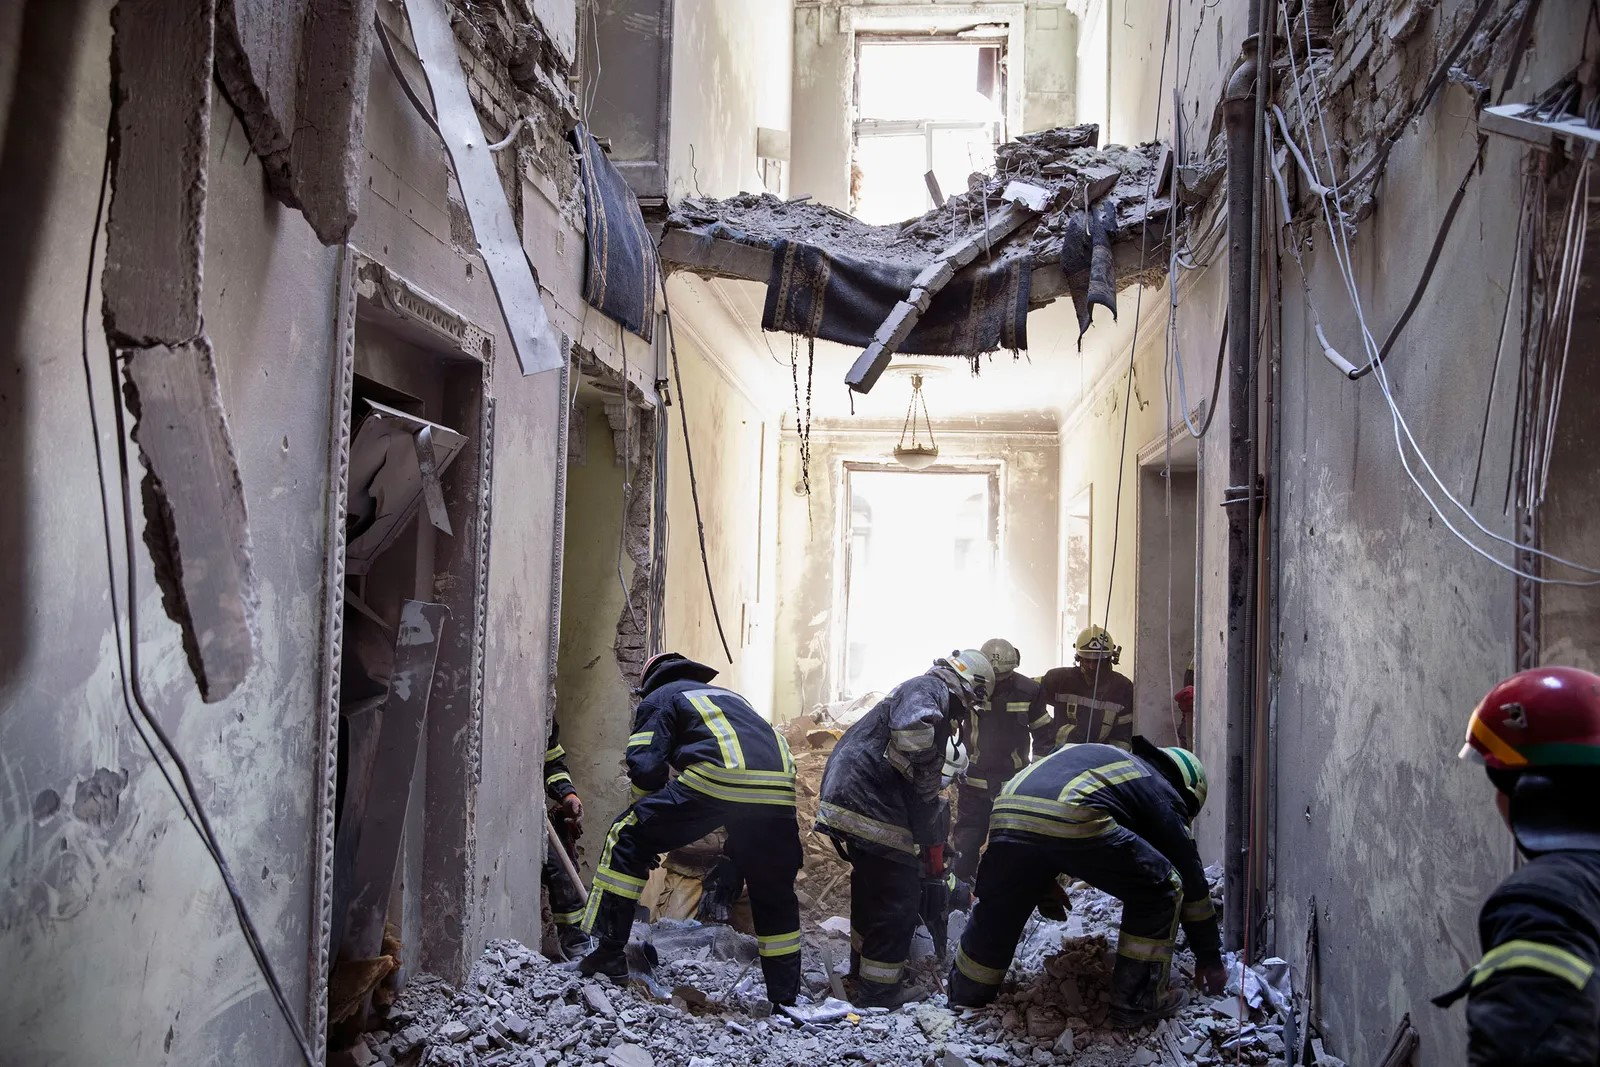 FIrefighters come through the rubble in the destroyed Ukrainian city of Kharkiv.